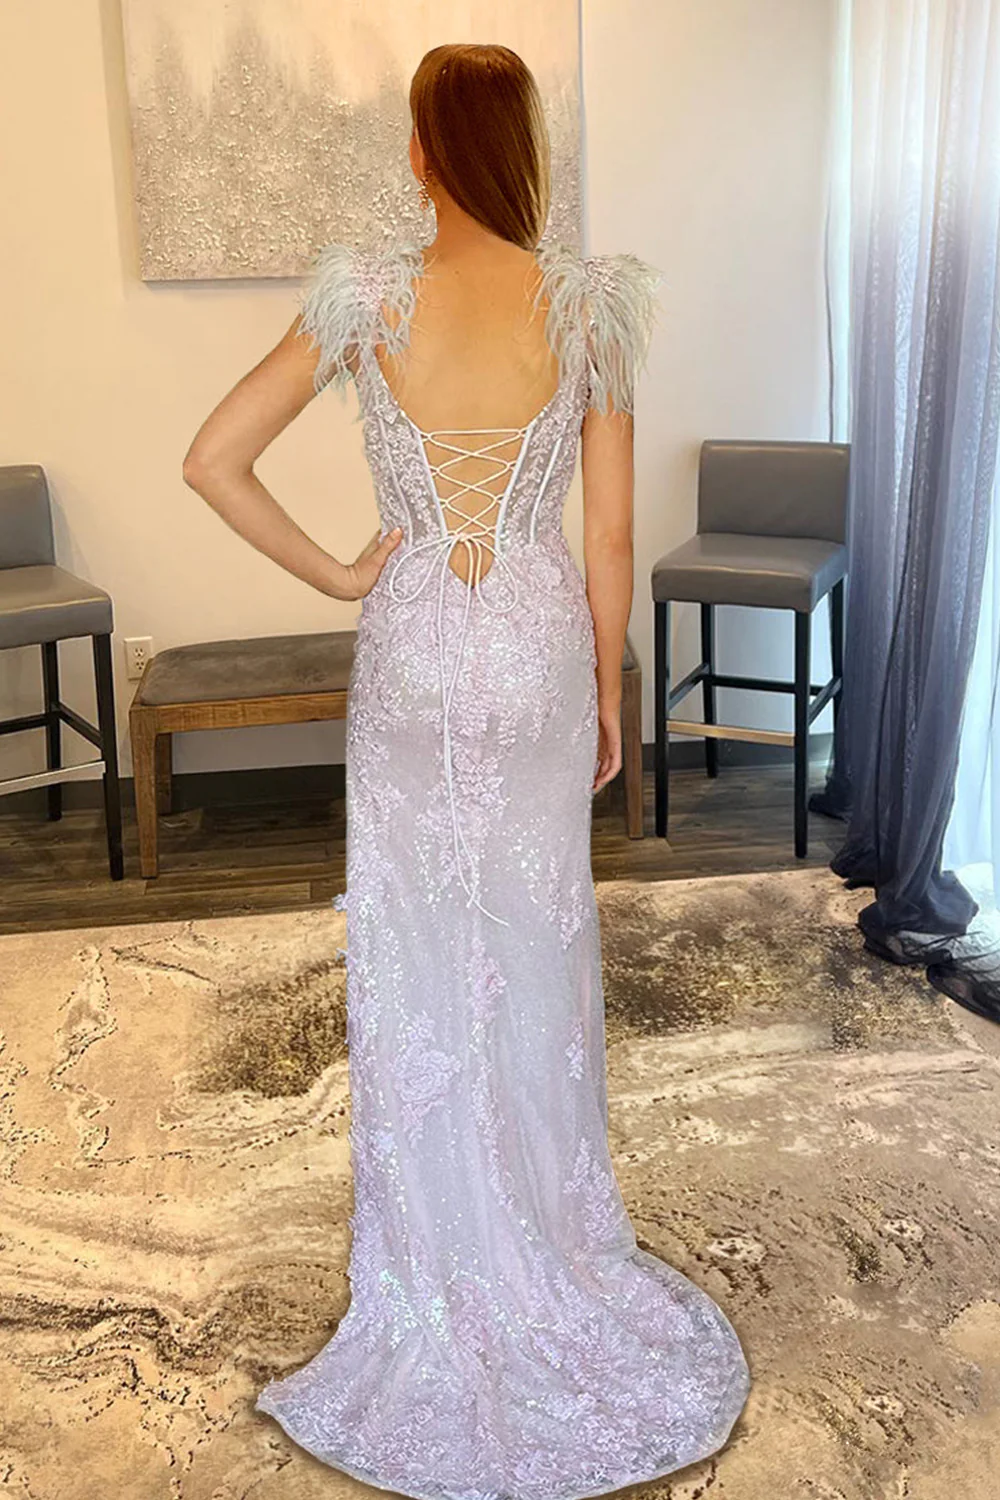 Lavender Appliques Mermaid Prom Dress with Feathers nv649